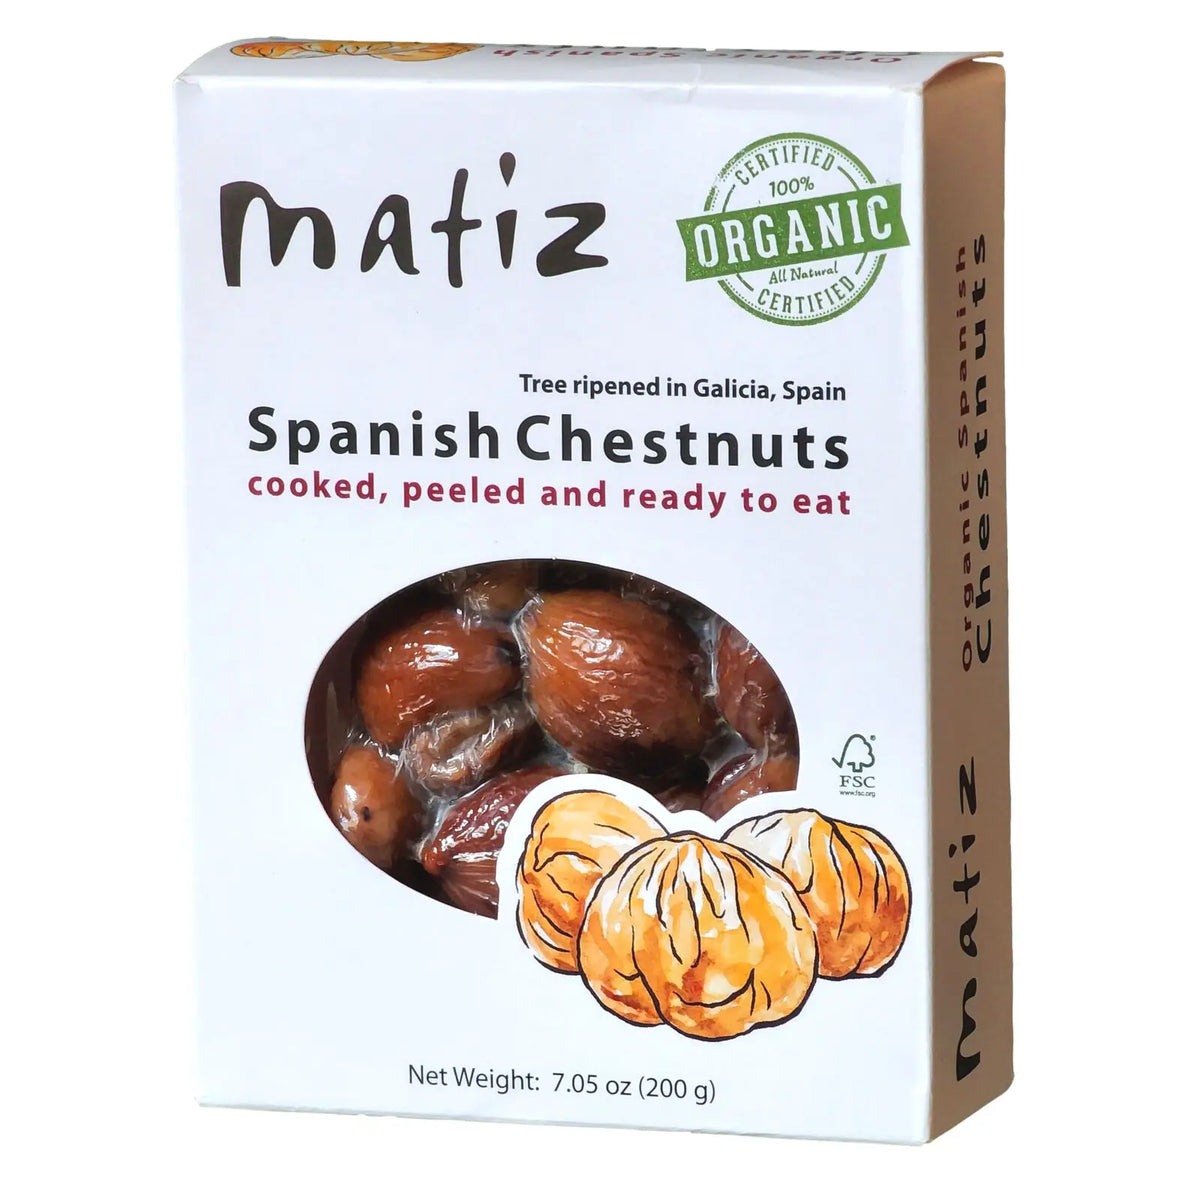 [BBD 5/24] Organic Marrons Glaces (Candied Chestnuts) x 8pc, 160g (5.6oz)